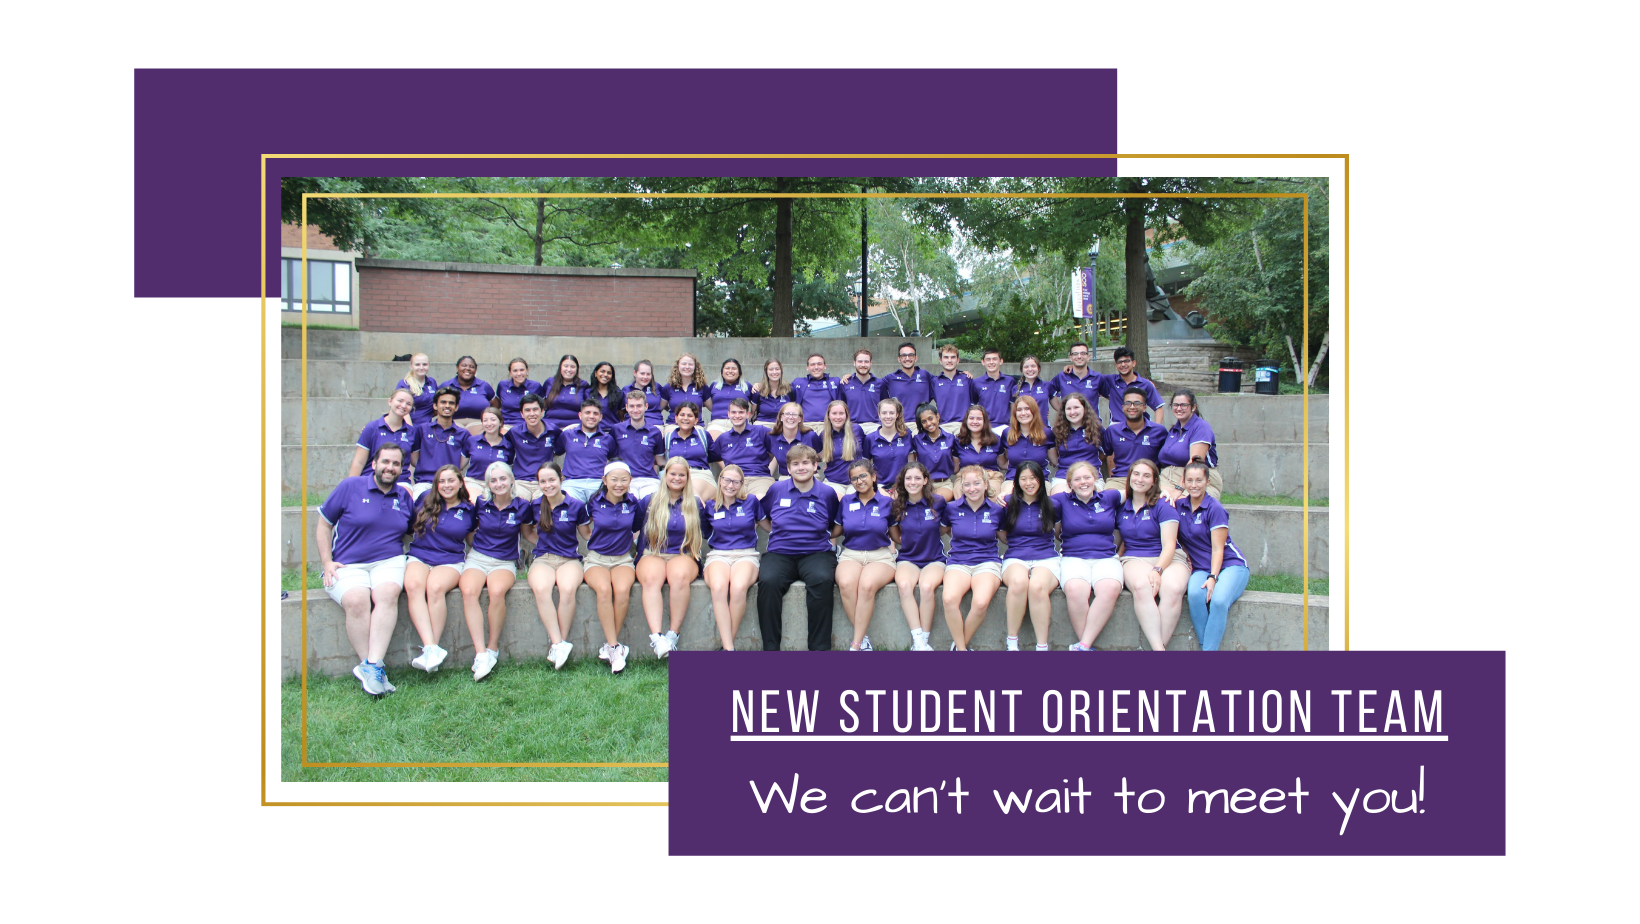 A photo of the New Student Orientation team, stating that they can't wait to meet you.